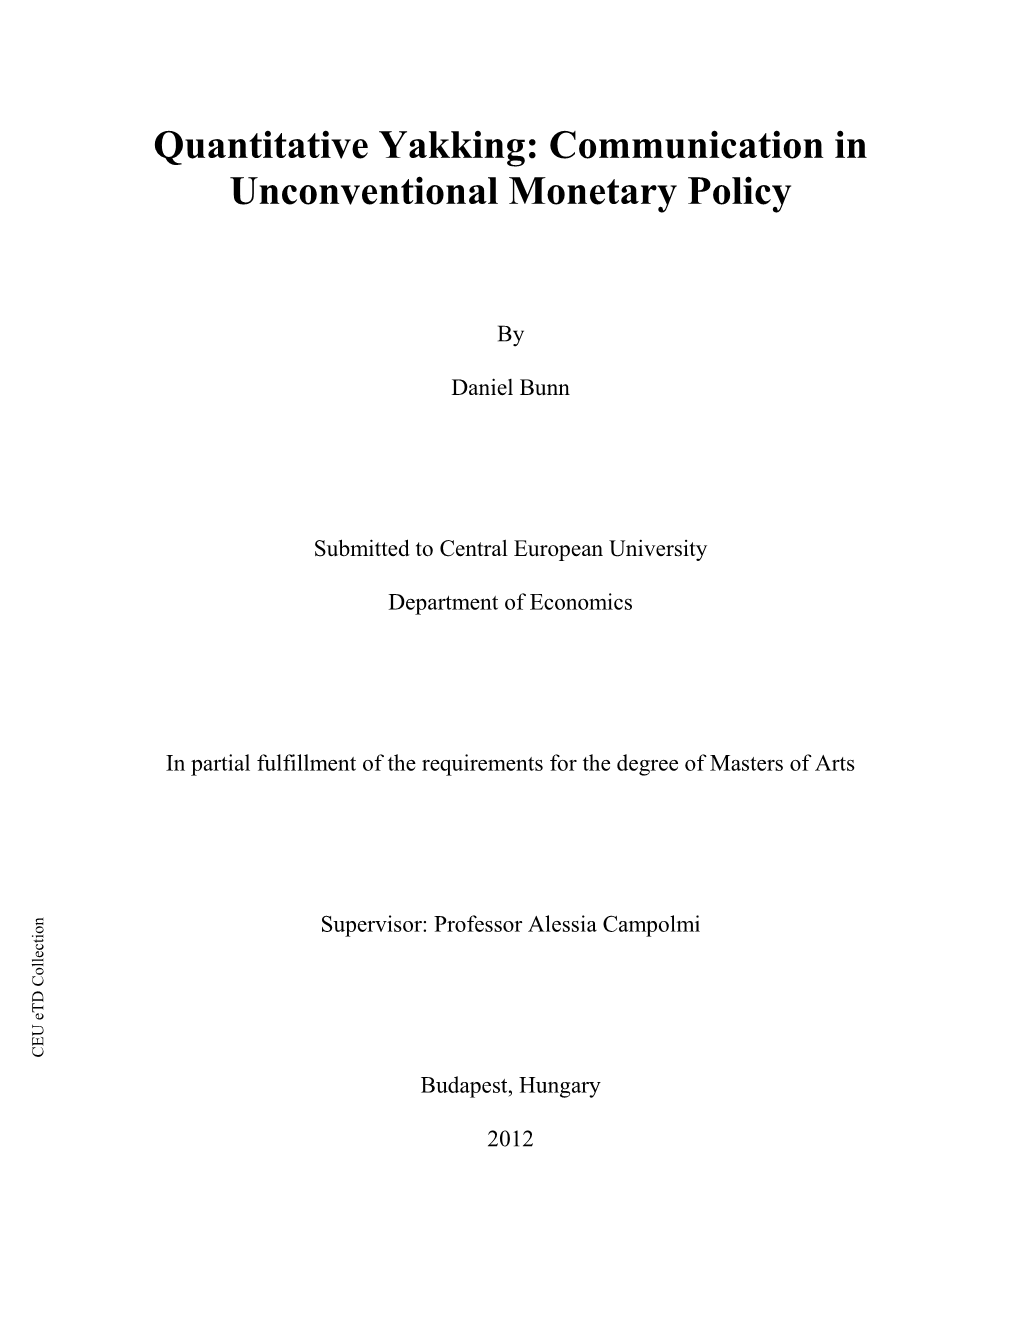 Communication in Unconventional Monetary Policy